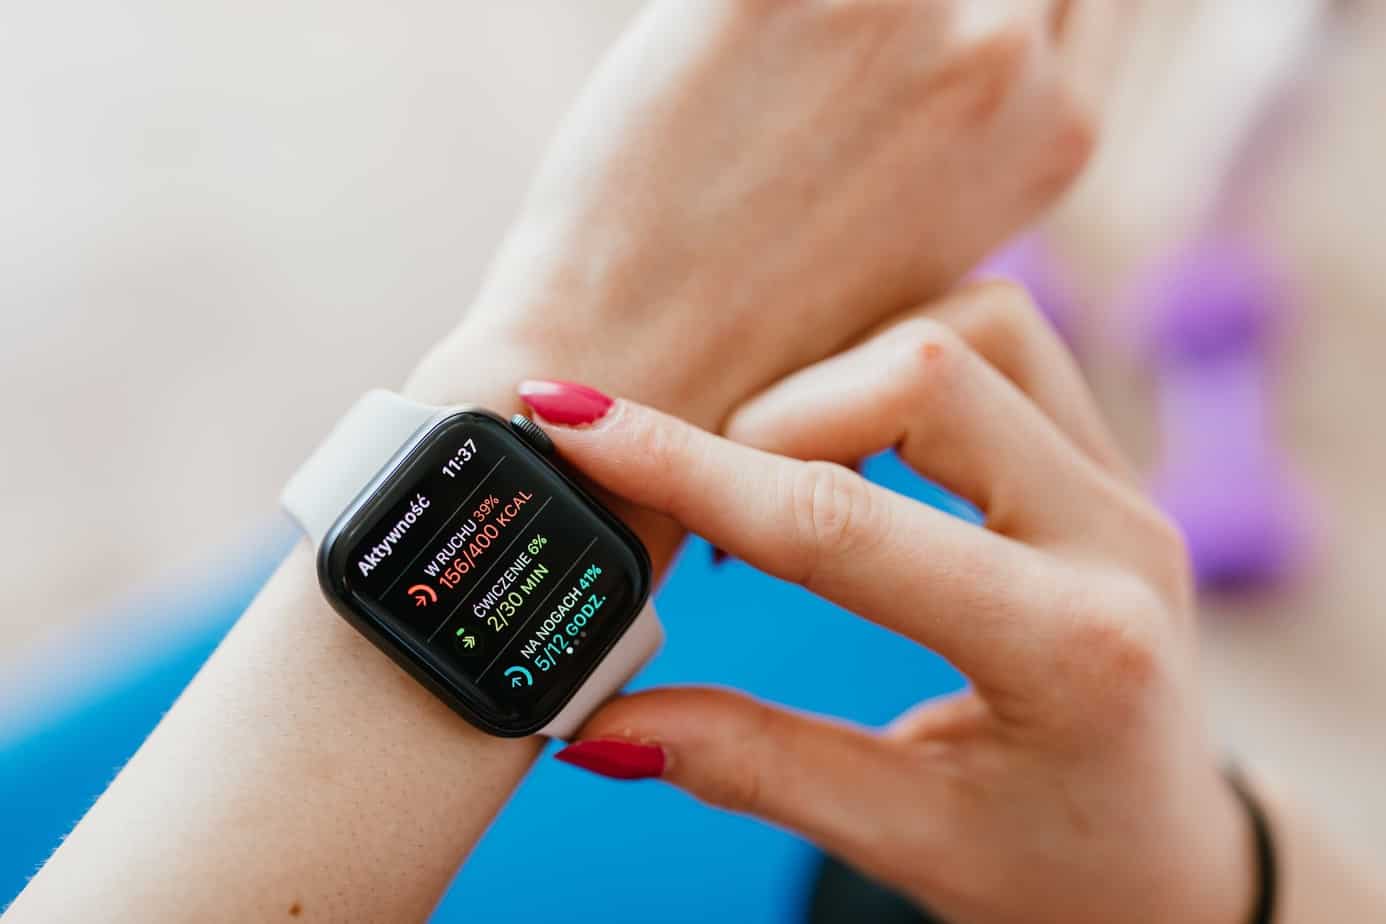 TOP 10 apps for physically active people